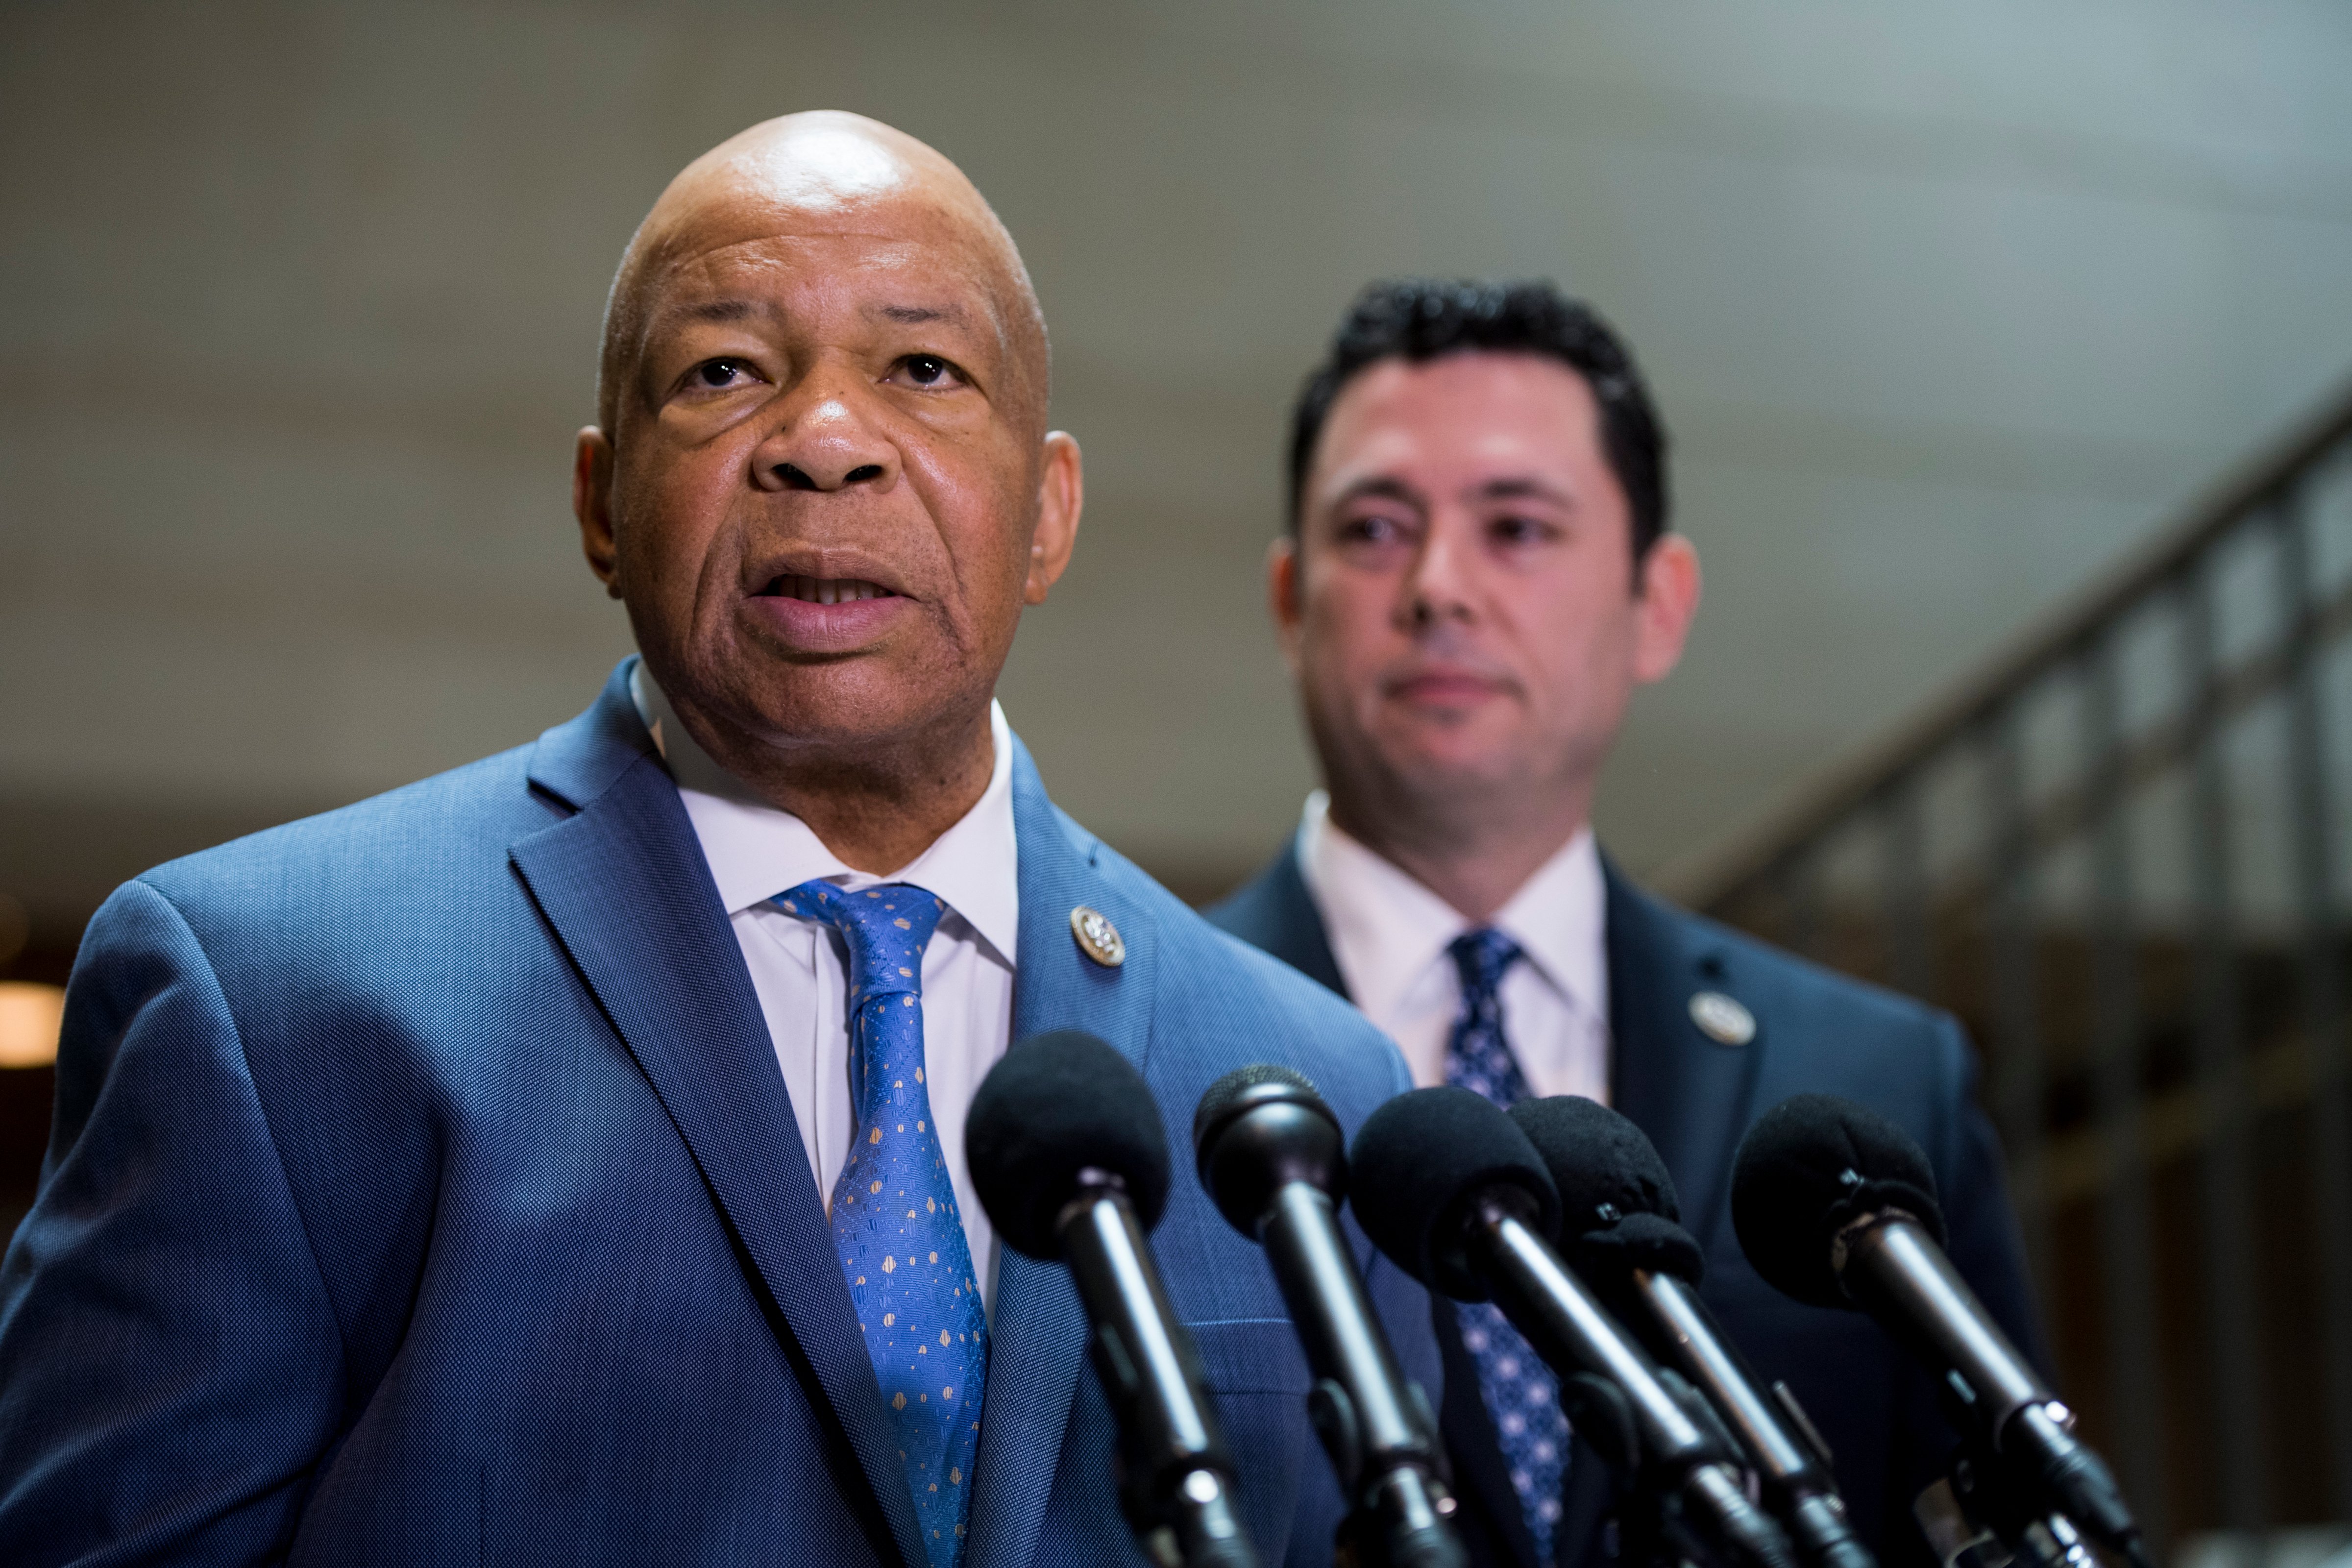 House Oversight Chairman Jason Chaffetz, R-Utah, right, and ranking Democrat Elijah Cummings, D-Md., hold a press conference on Tuesday, April 25, 2017 (Bill Clark—CQ-Roll Call,Inc./Getty Images)